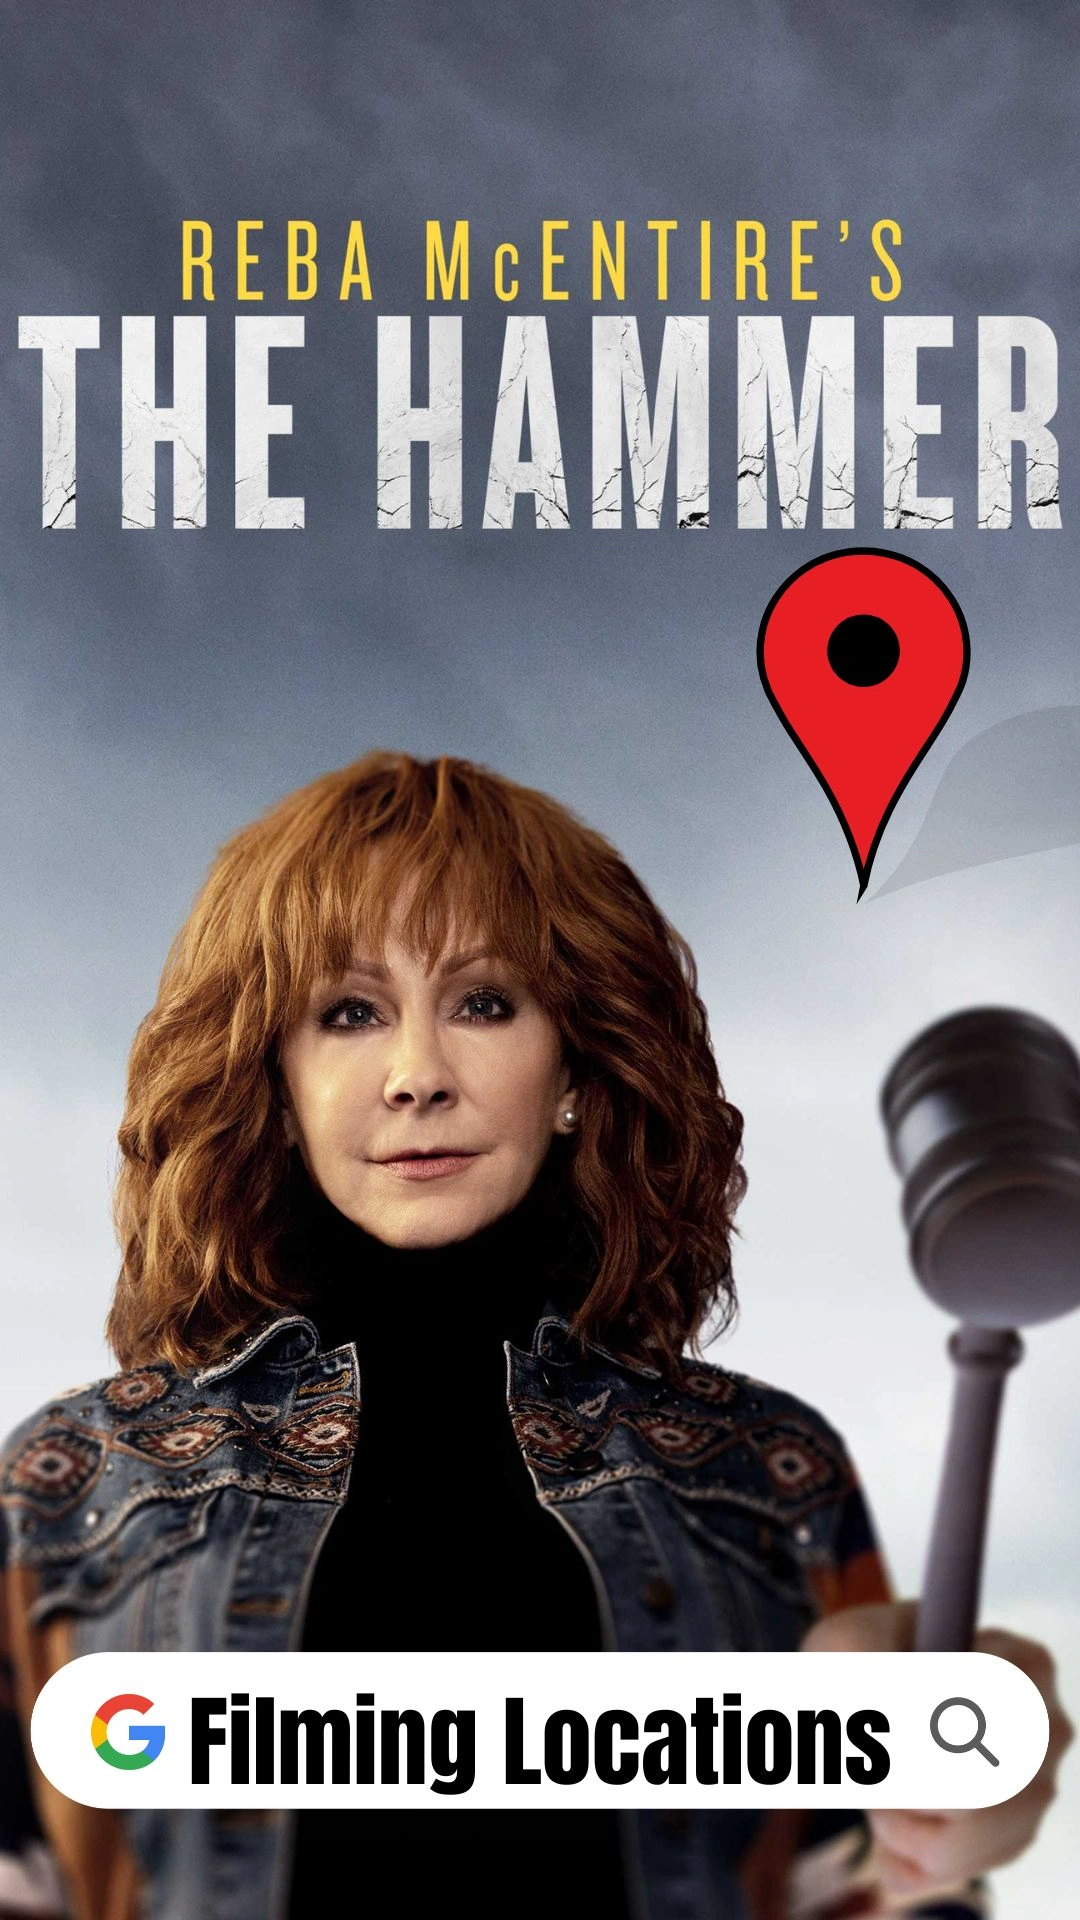 The Hammer Filming Locations